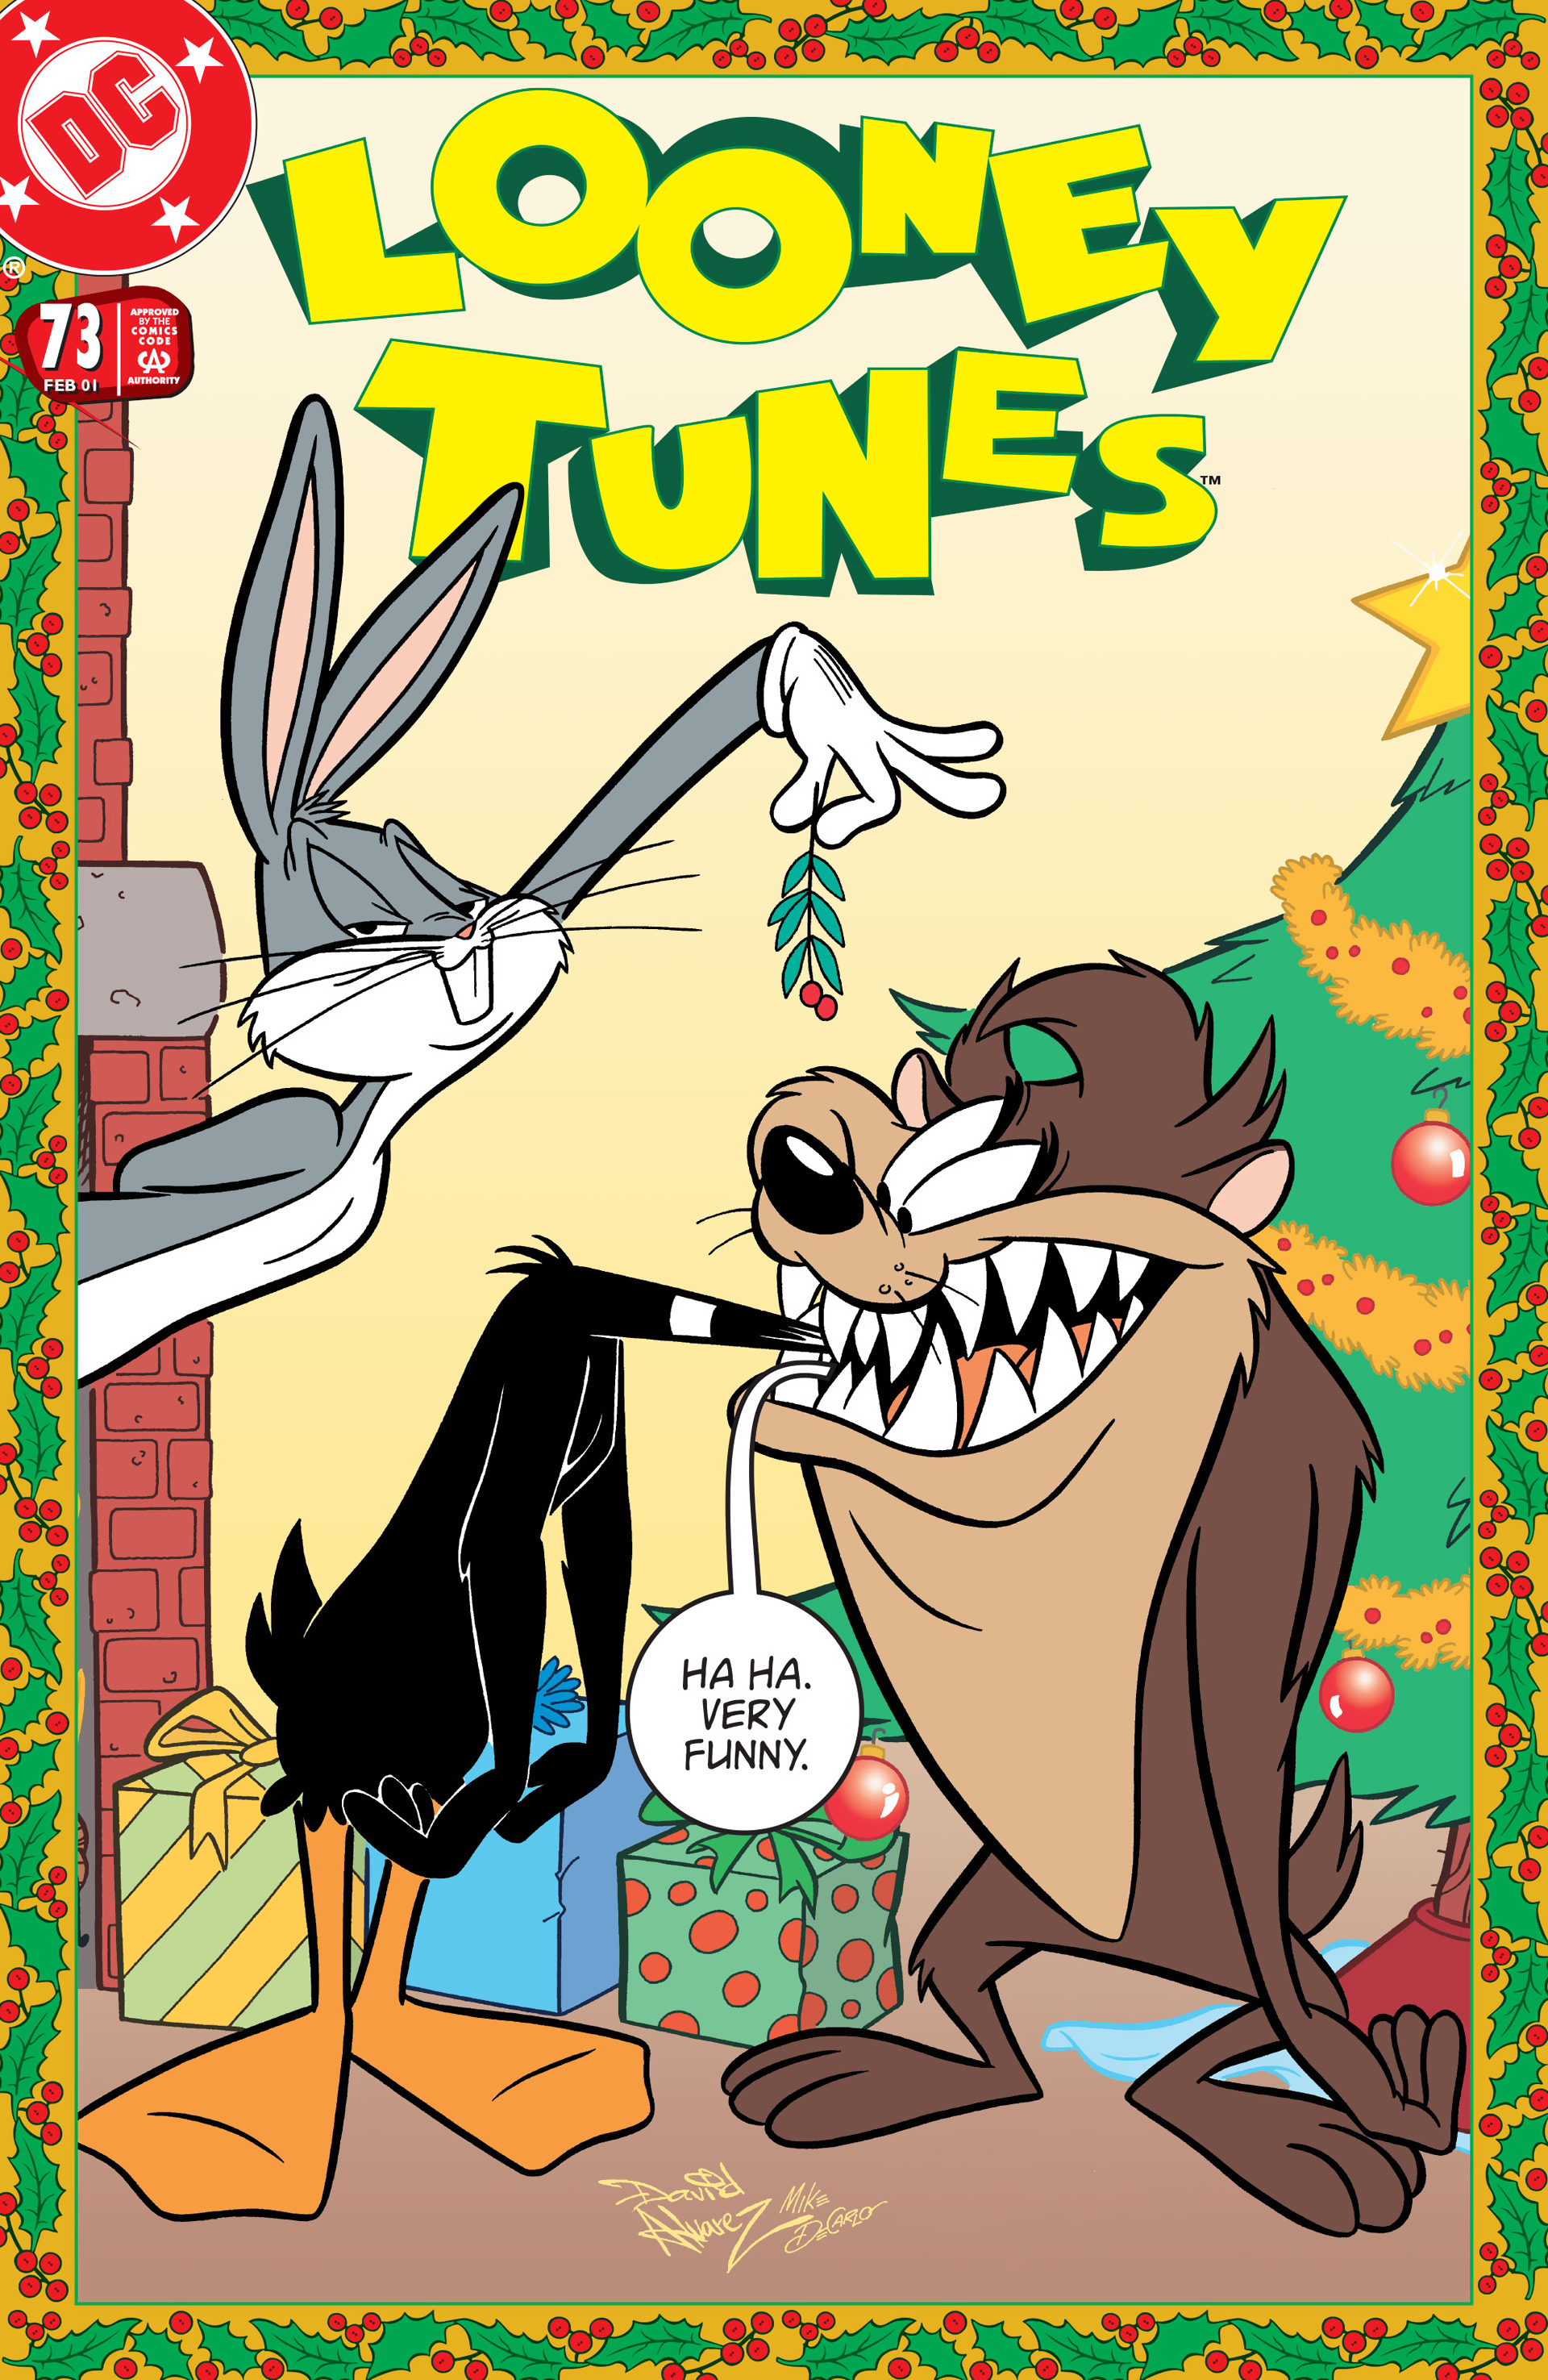 Looney Tunes (1994) issue 73 - Page 1